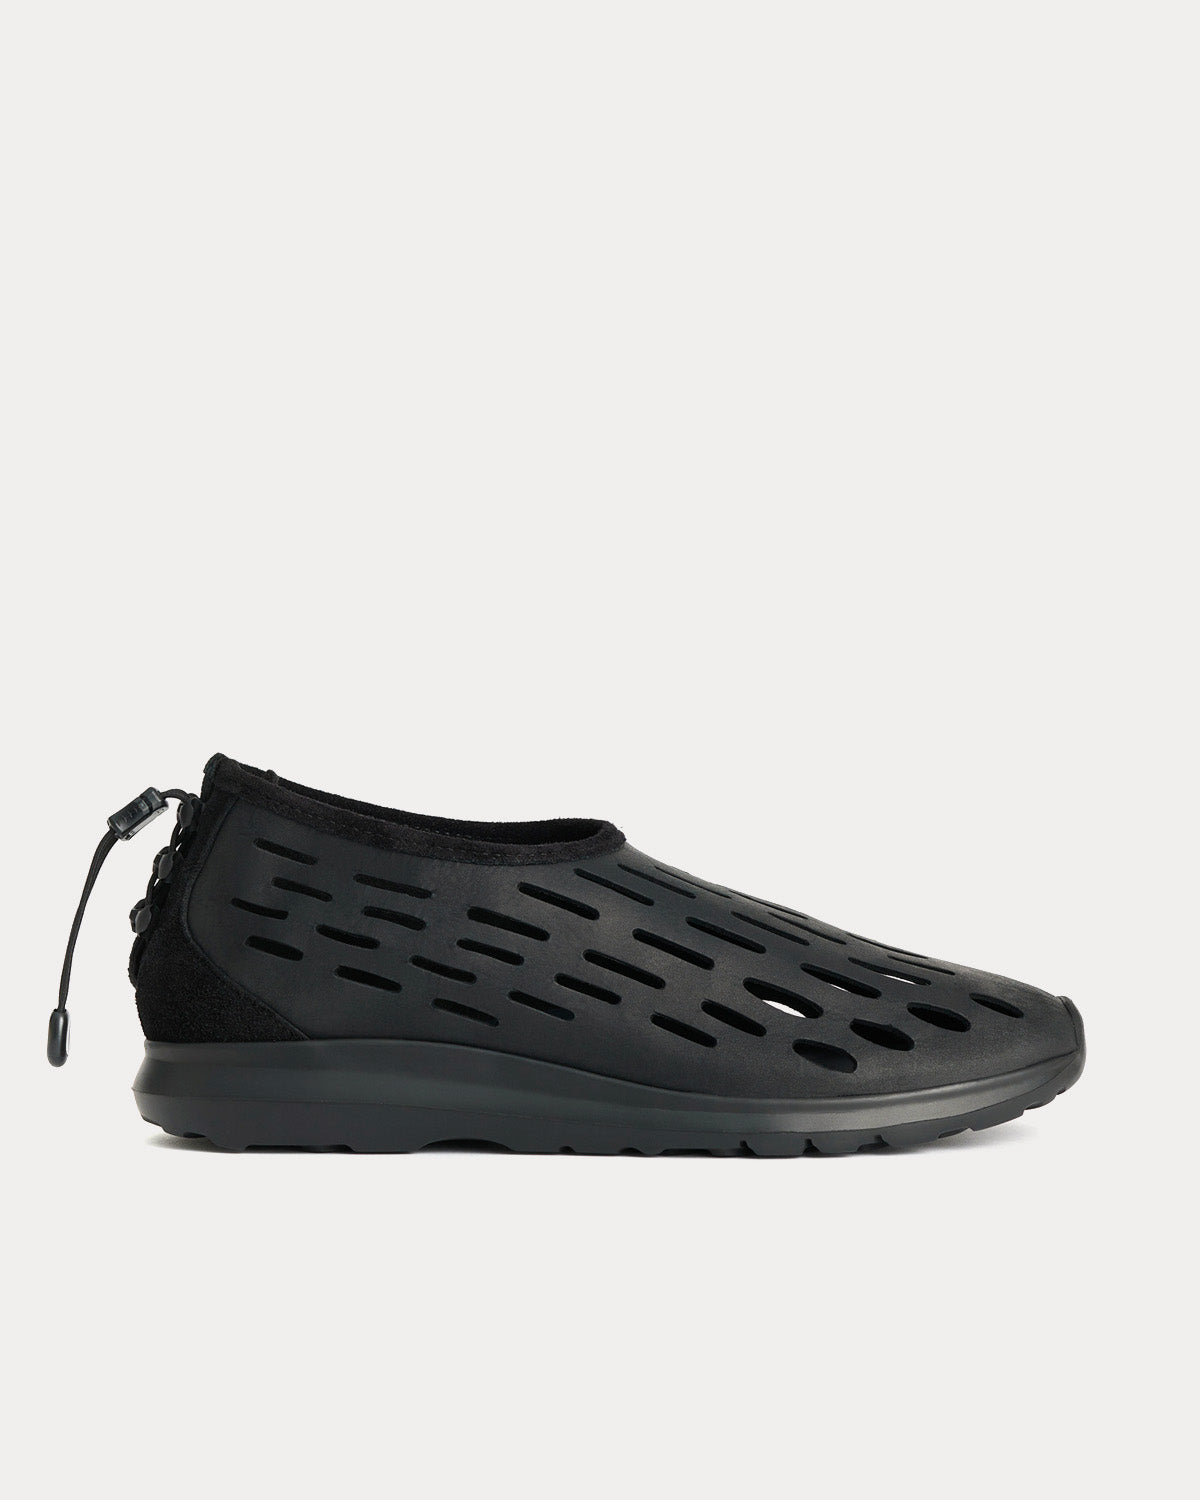 Our Legacy - Strainer Leather Black Slip On Sneakers